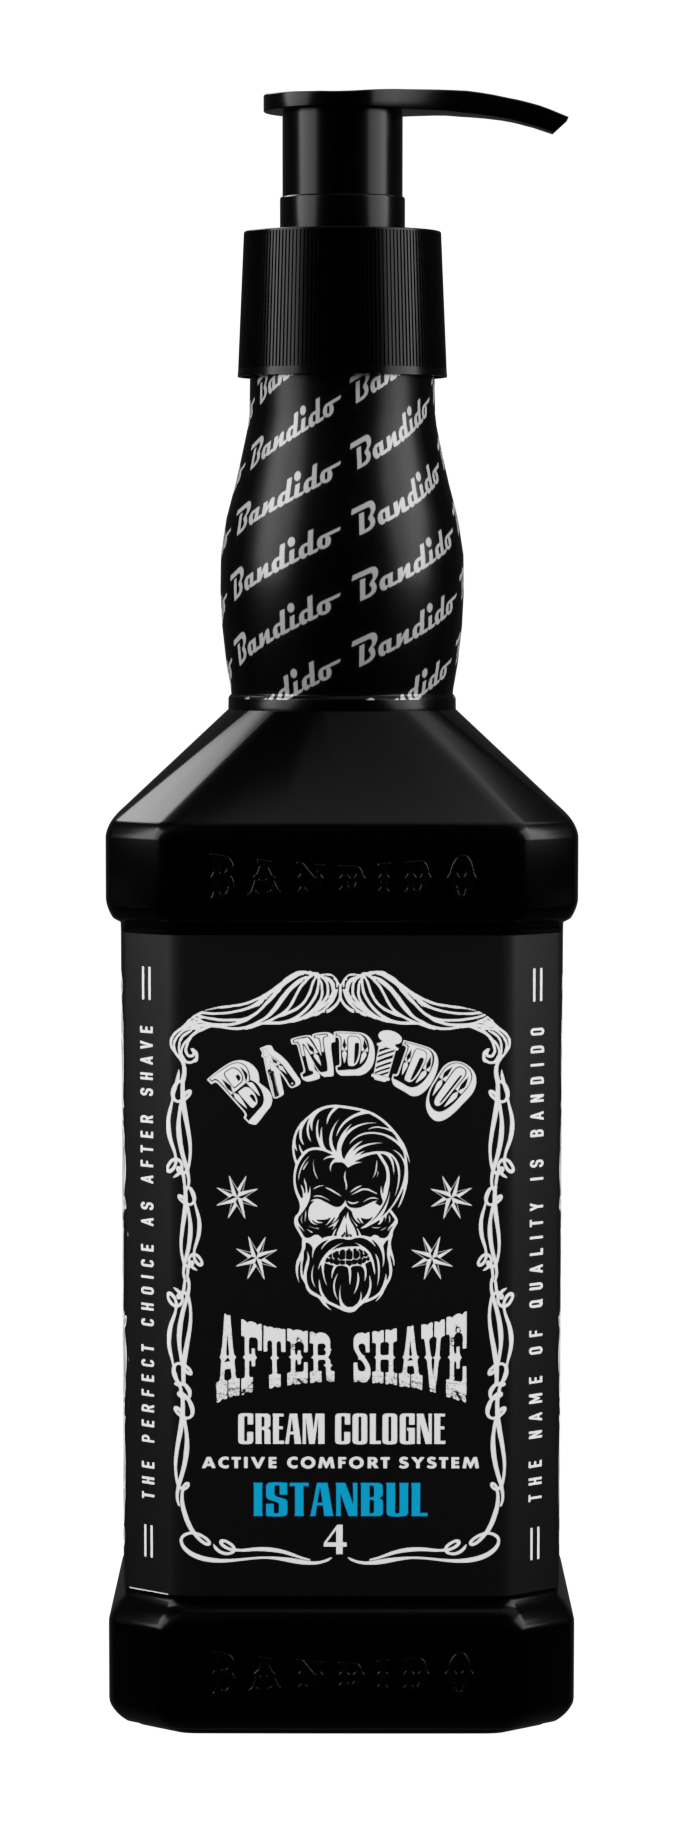 Bandido Istanbul After Shave Cream Cologne 350ml/11.83fl oz